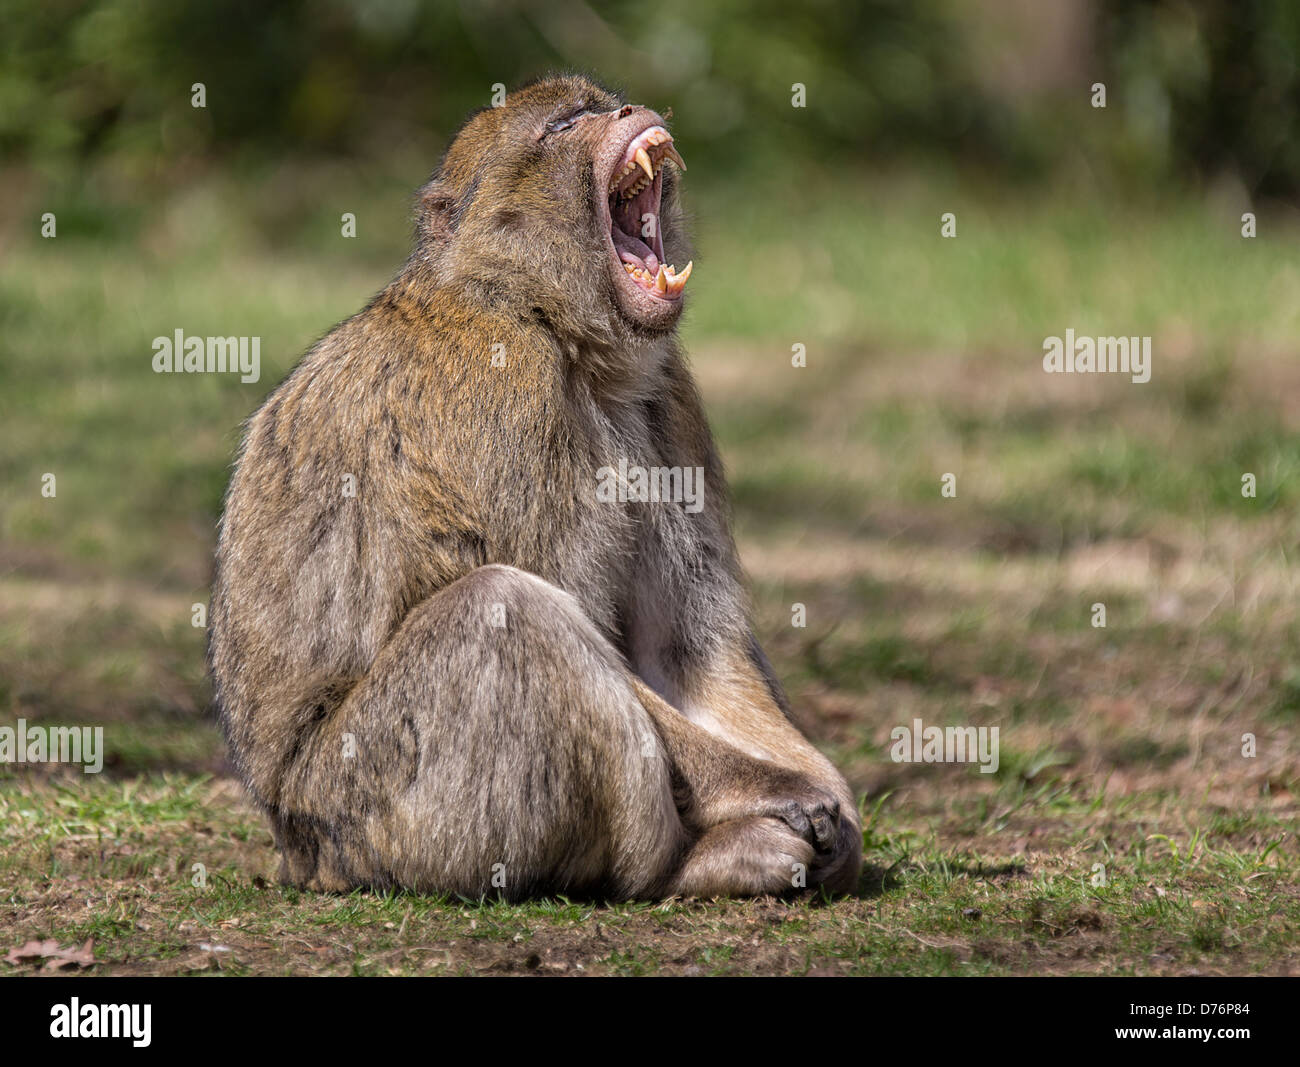 macaque-monkey-sitting-with-wide-open-mouth-showing-teeth-D76P84.jpg